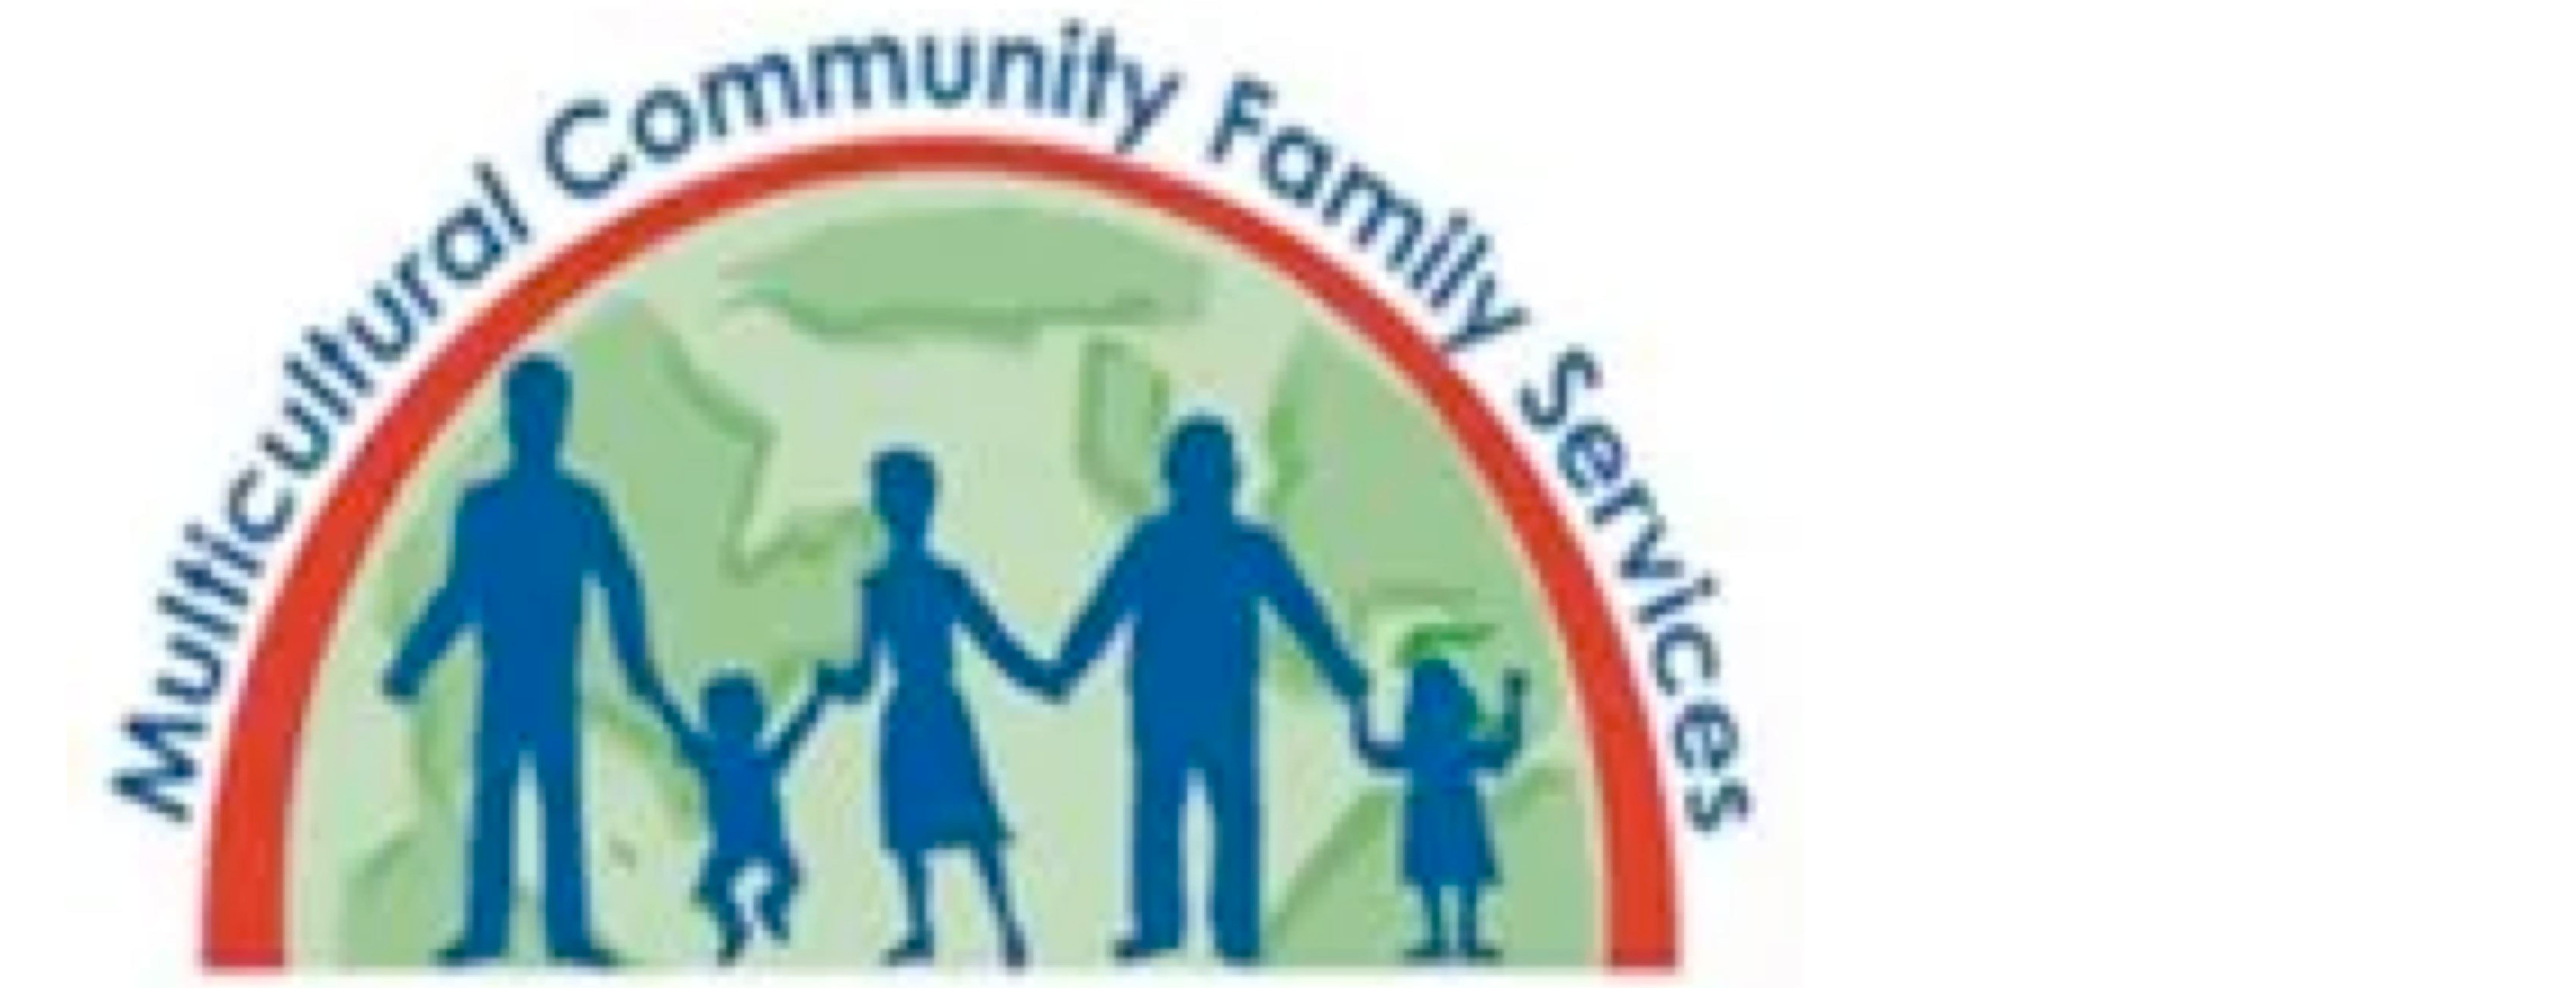 Multicultural Community Family Services Inc. logo